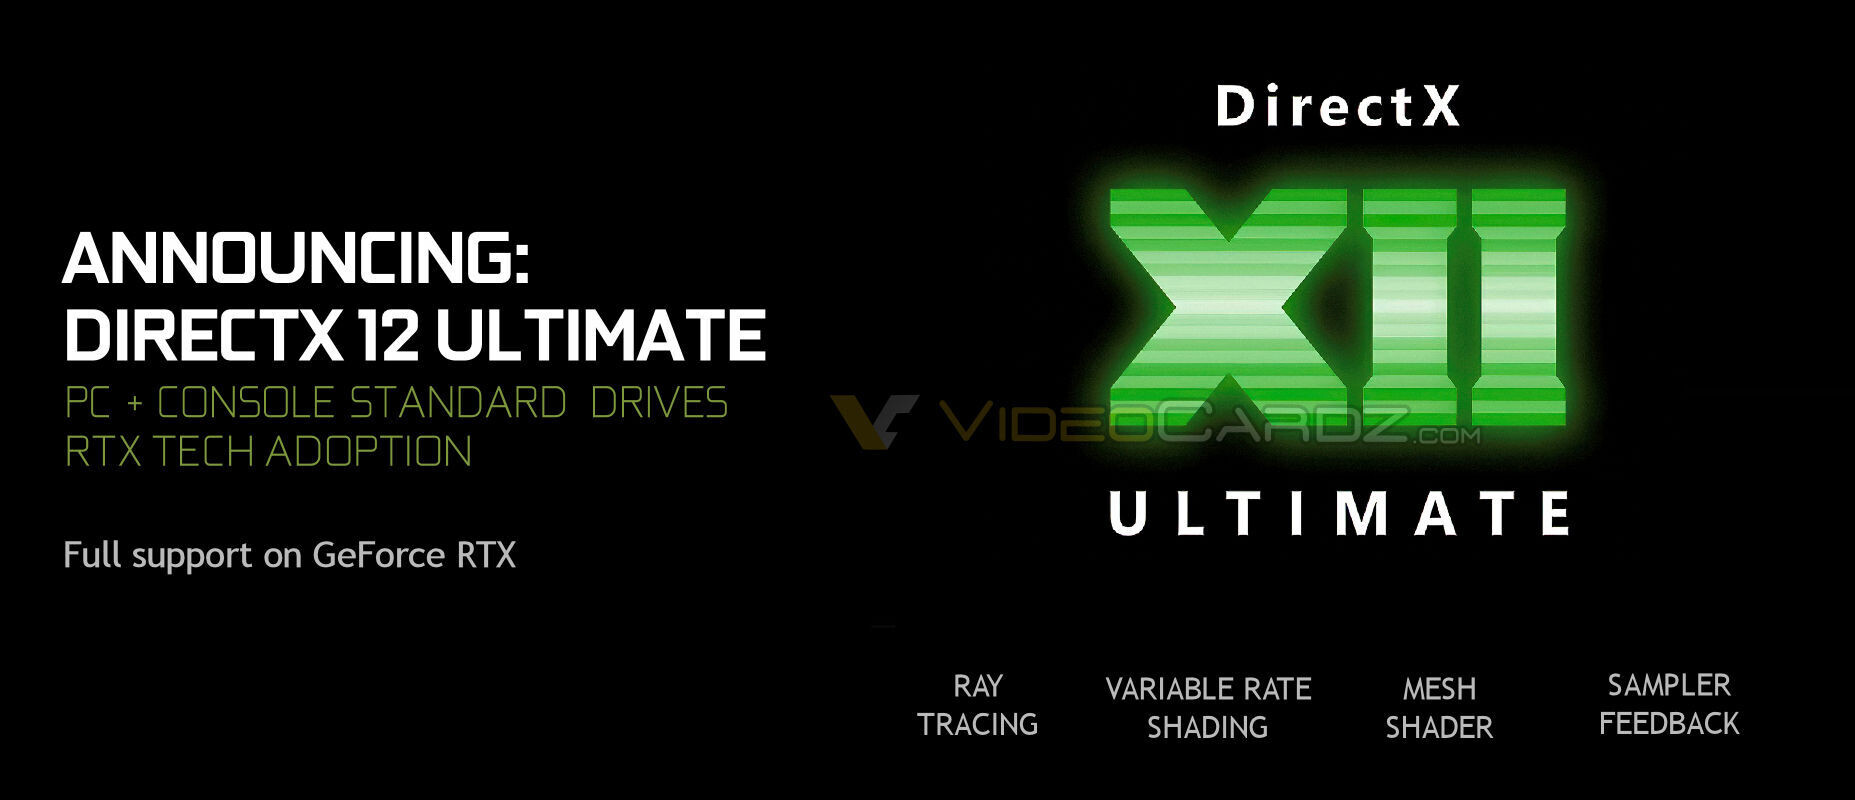 DirectX 12 tested: An early win for AMD and disappointment for Nvidia